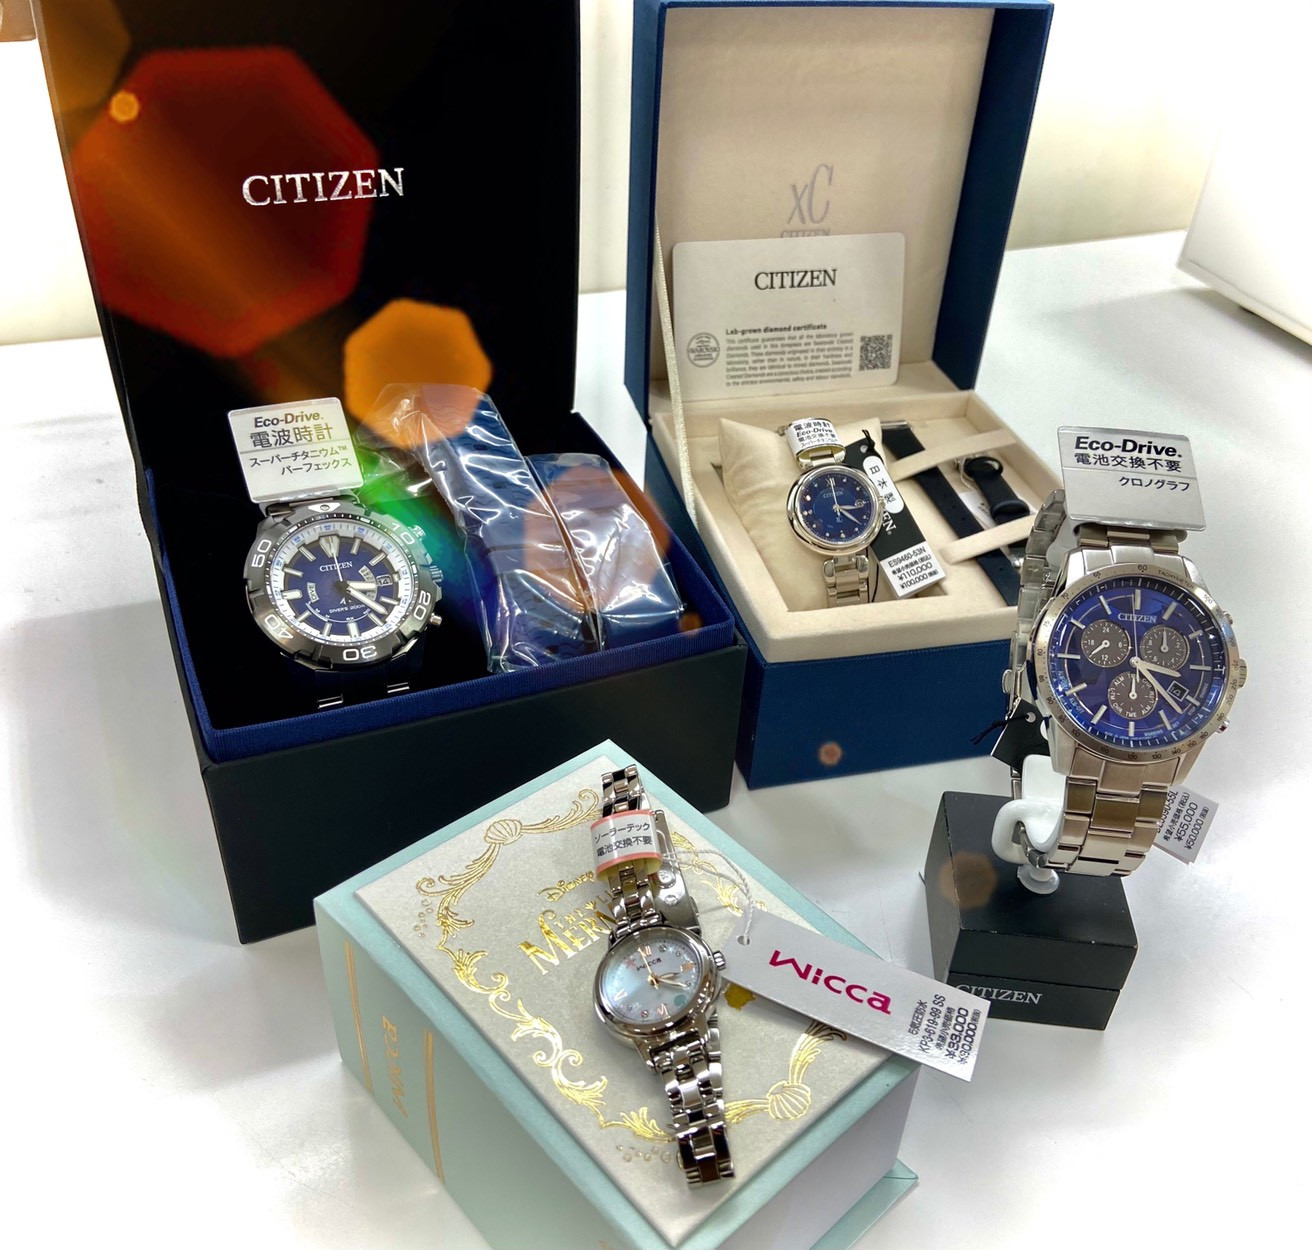 CITIZEN 「YELL Collection」新商品入荷しました！